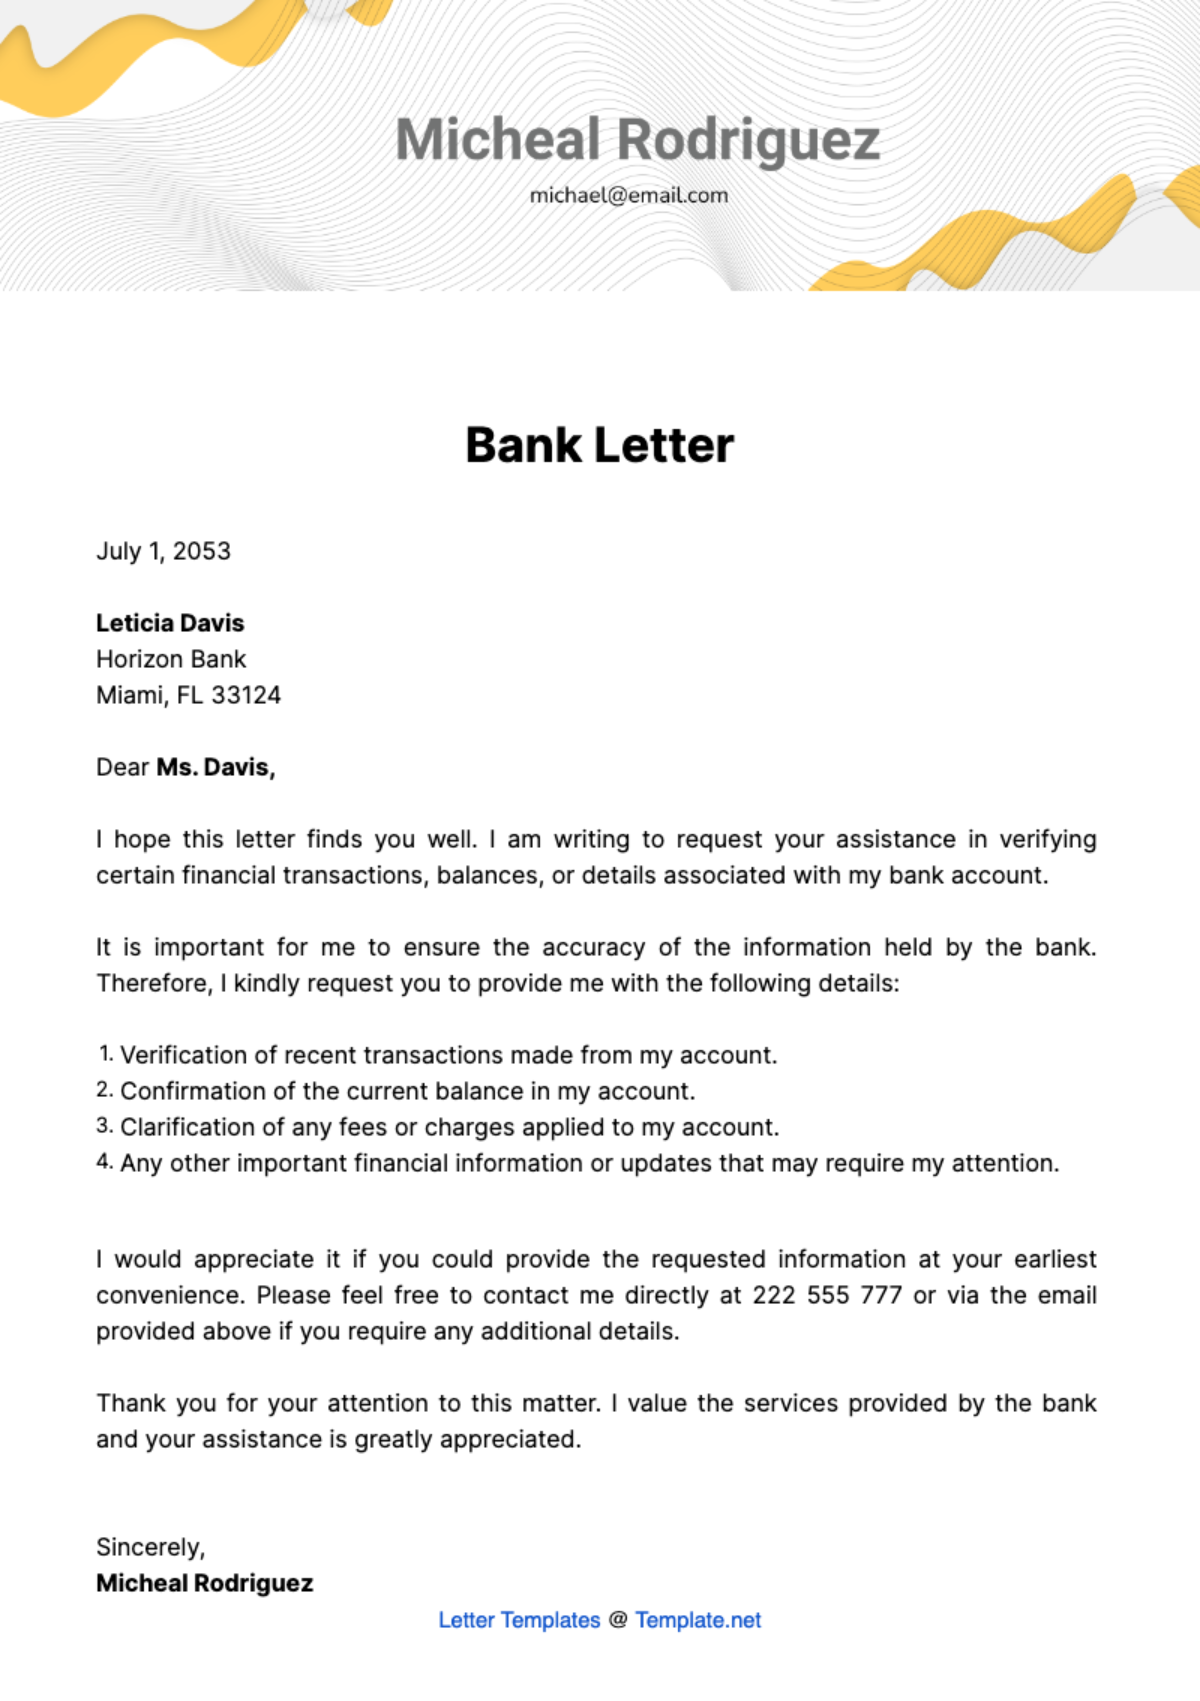 Bank Letter Template